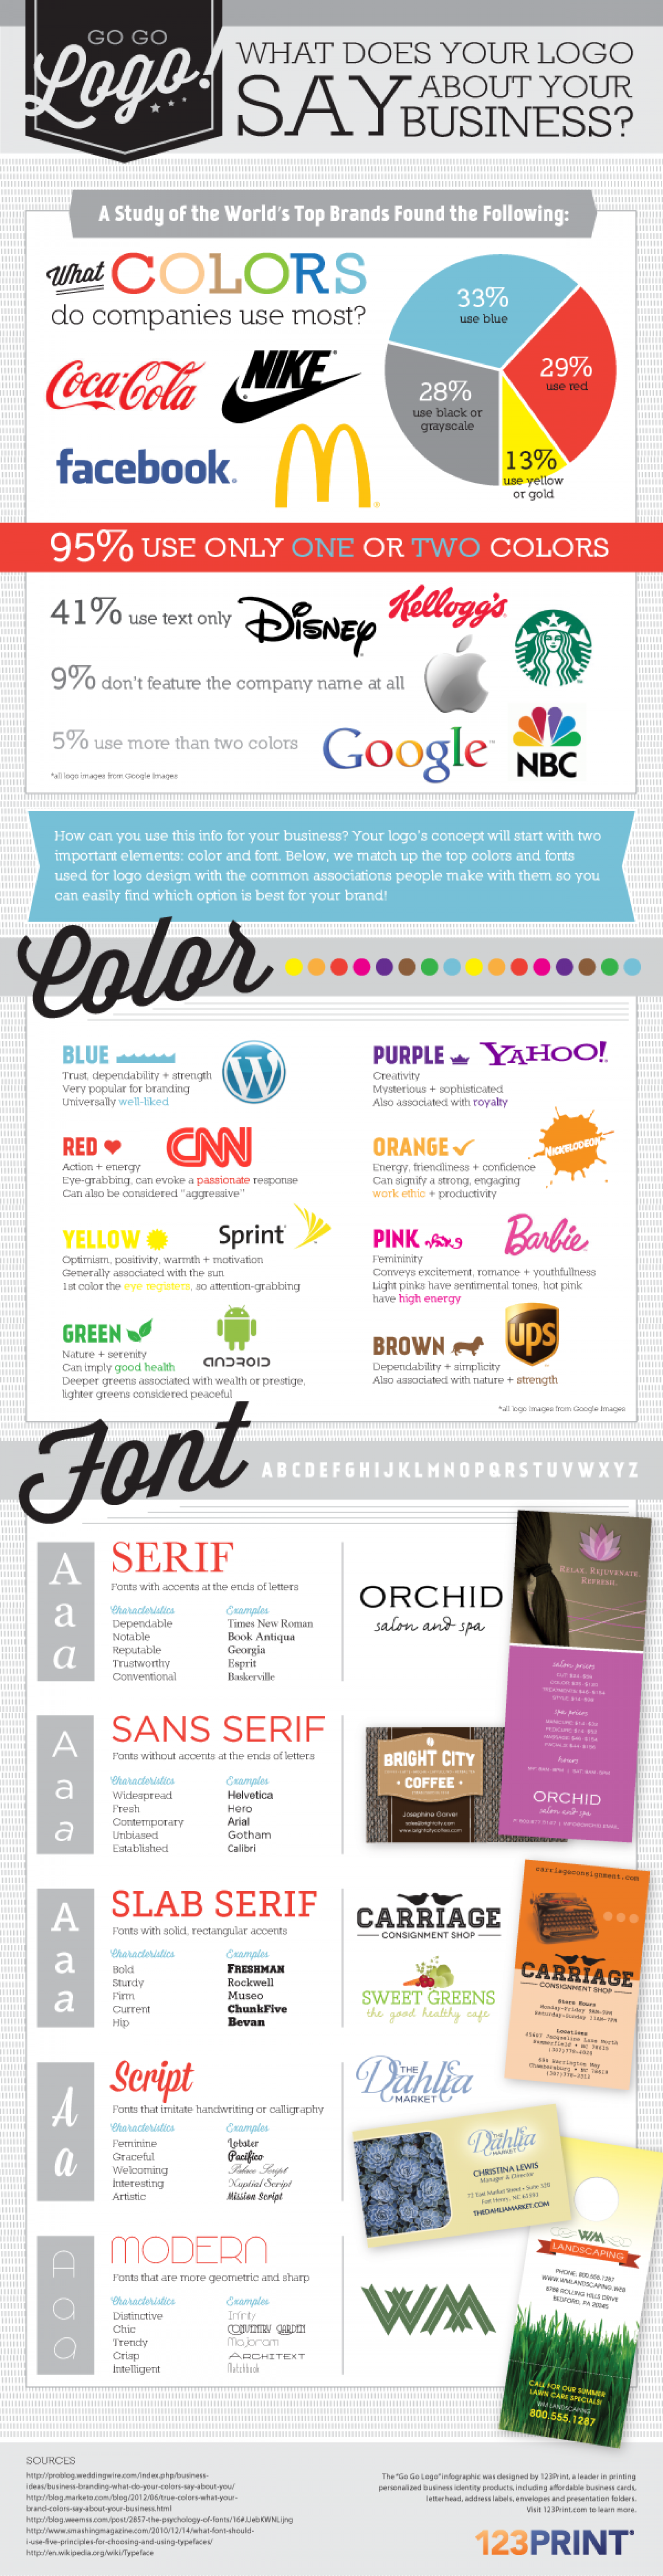 What Does Your Logo Say About Your Business? Infographic